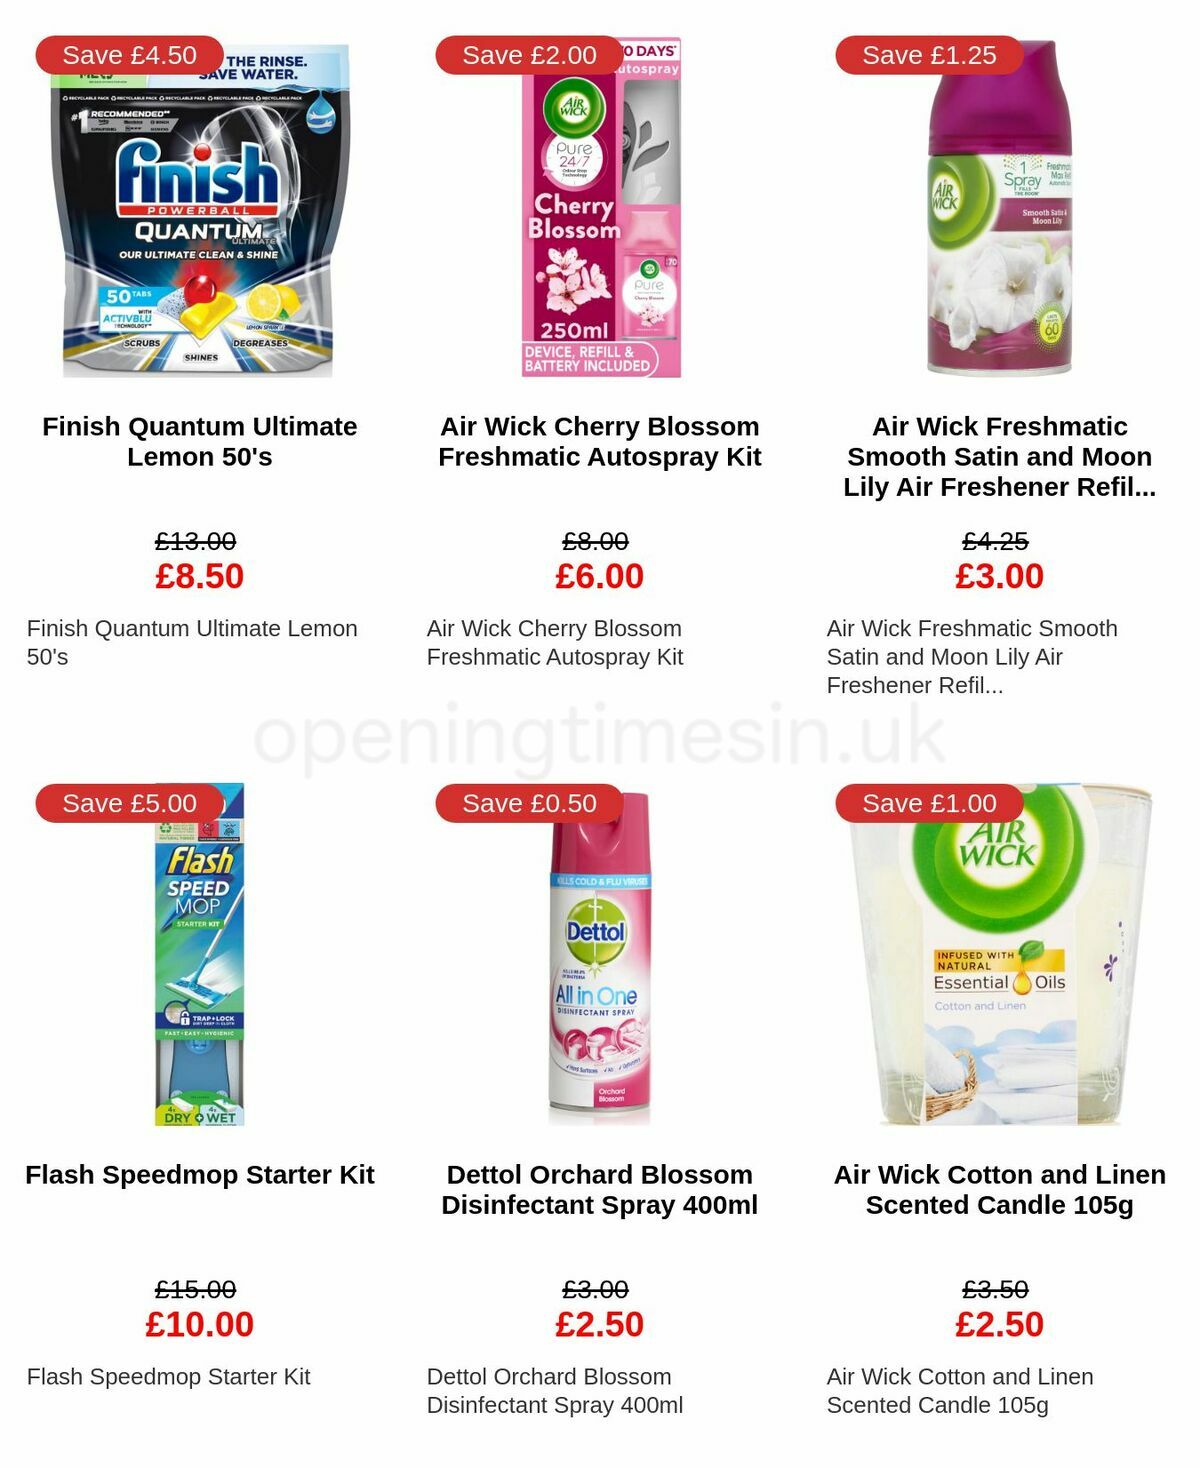 Wilko Offers from 25 January